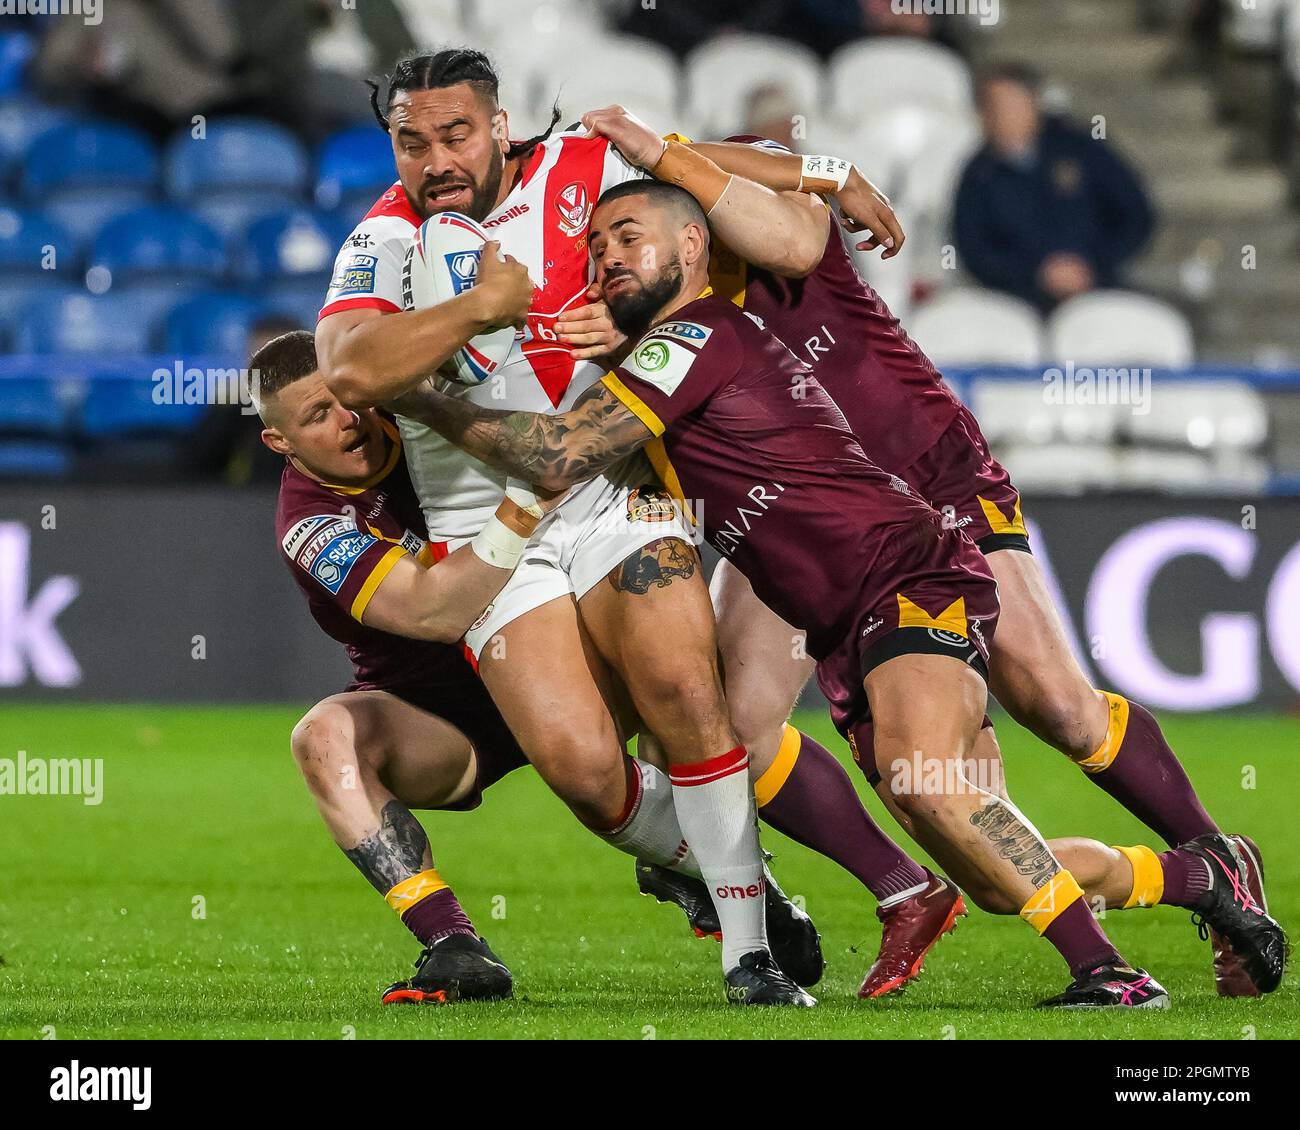 Konrad Hurrell #23 of St Helens is tackled by Luke Yates #13 and Nathan Peats #9 of Huddersfield Giants during the Betfred Super League Round 6 match Huddersfield Giants vs St Helens at John Smith's Stadium, Huddersfield, United Kingdom, 23rd March 2023  (Photo by Craig Thomas/News Images) Stock Photo